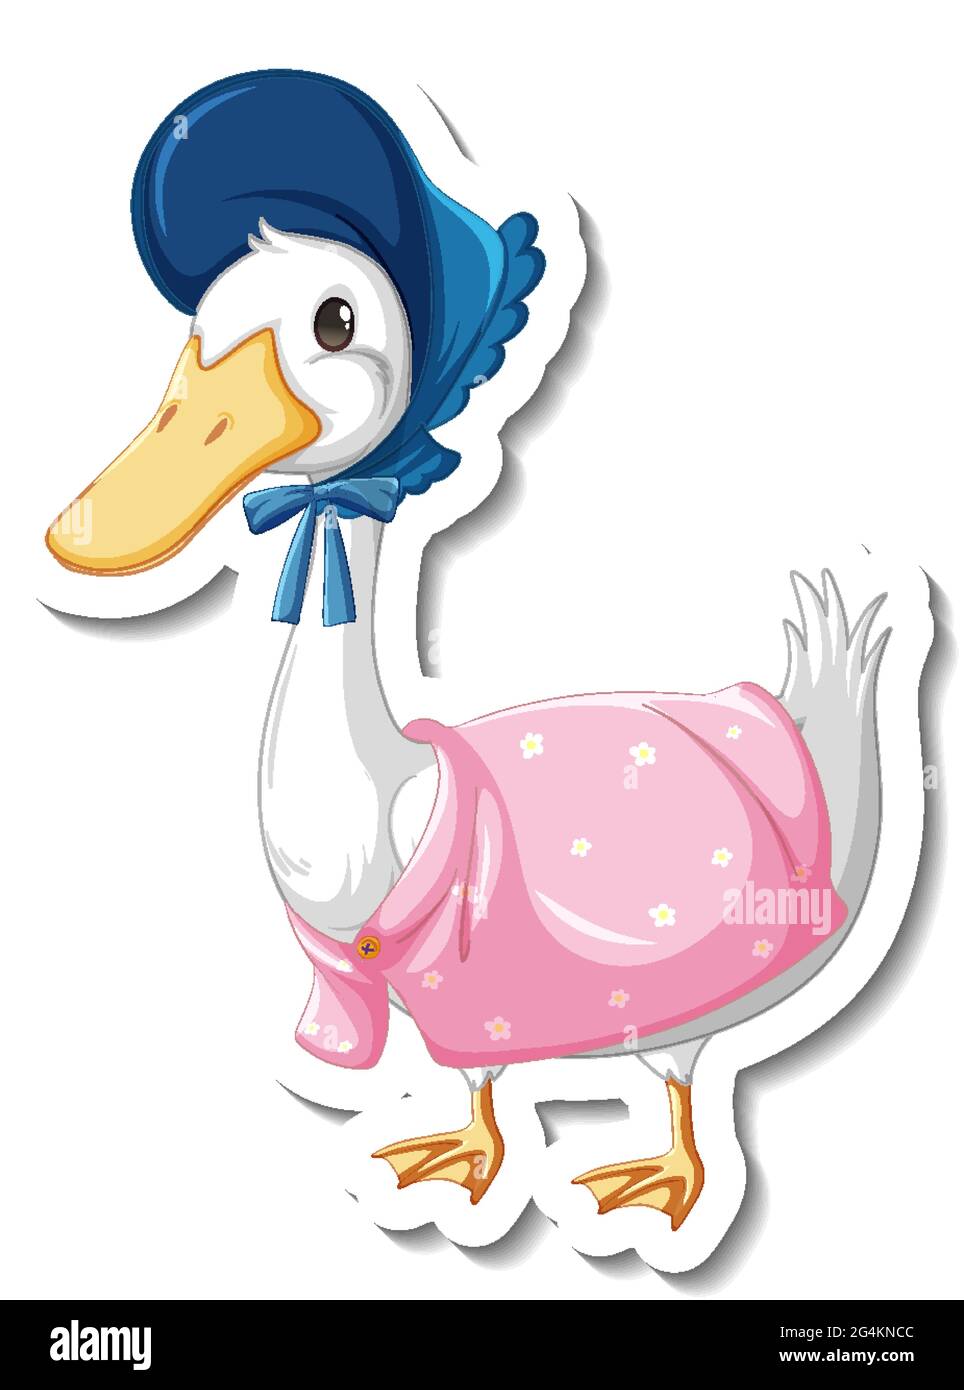 Sticker template with a duck wearing maid costume isolated illustration ...